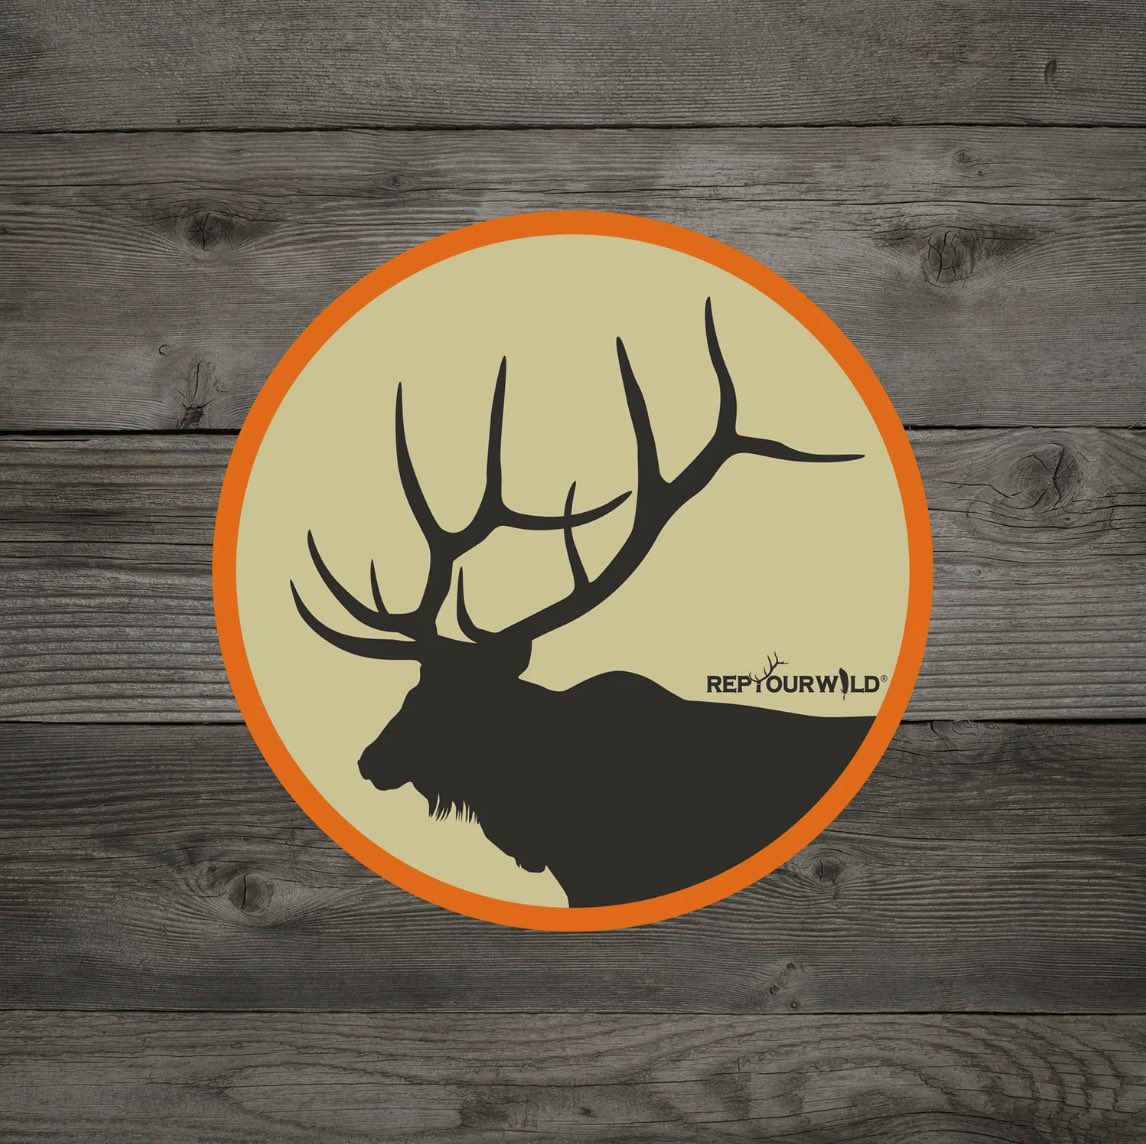 Elk, sheep, pronghorn, and more!
We have a variety of stickers available. See more at the link in our bio.

#repyourwild #elkshed #deerhunting #elkhunting #hunting #sheephunting